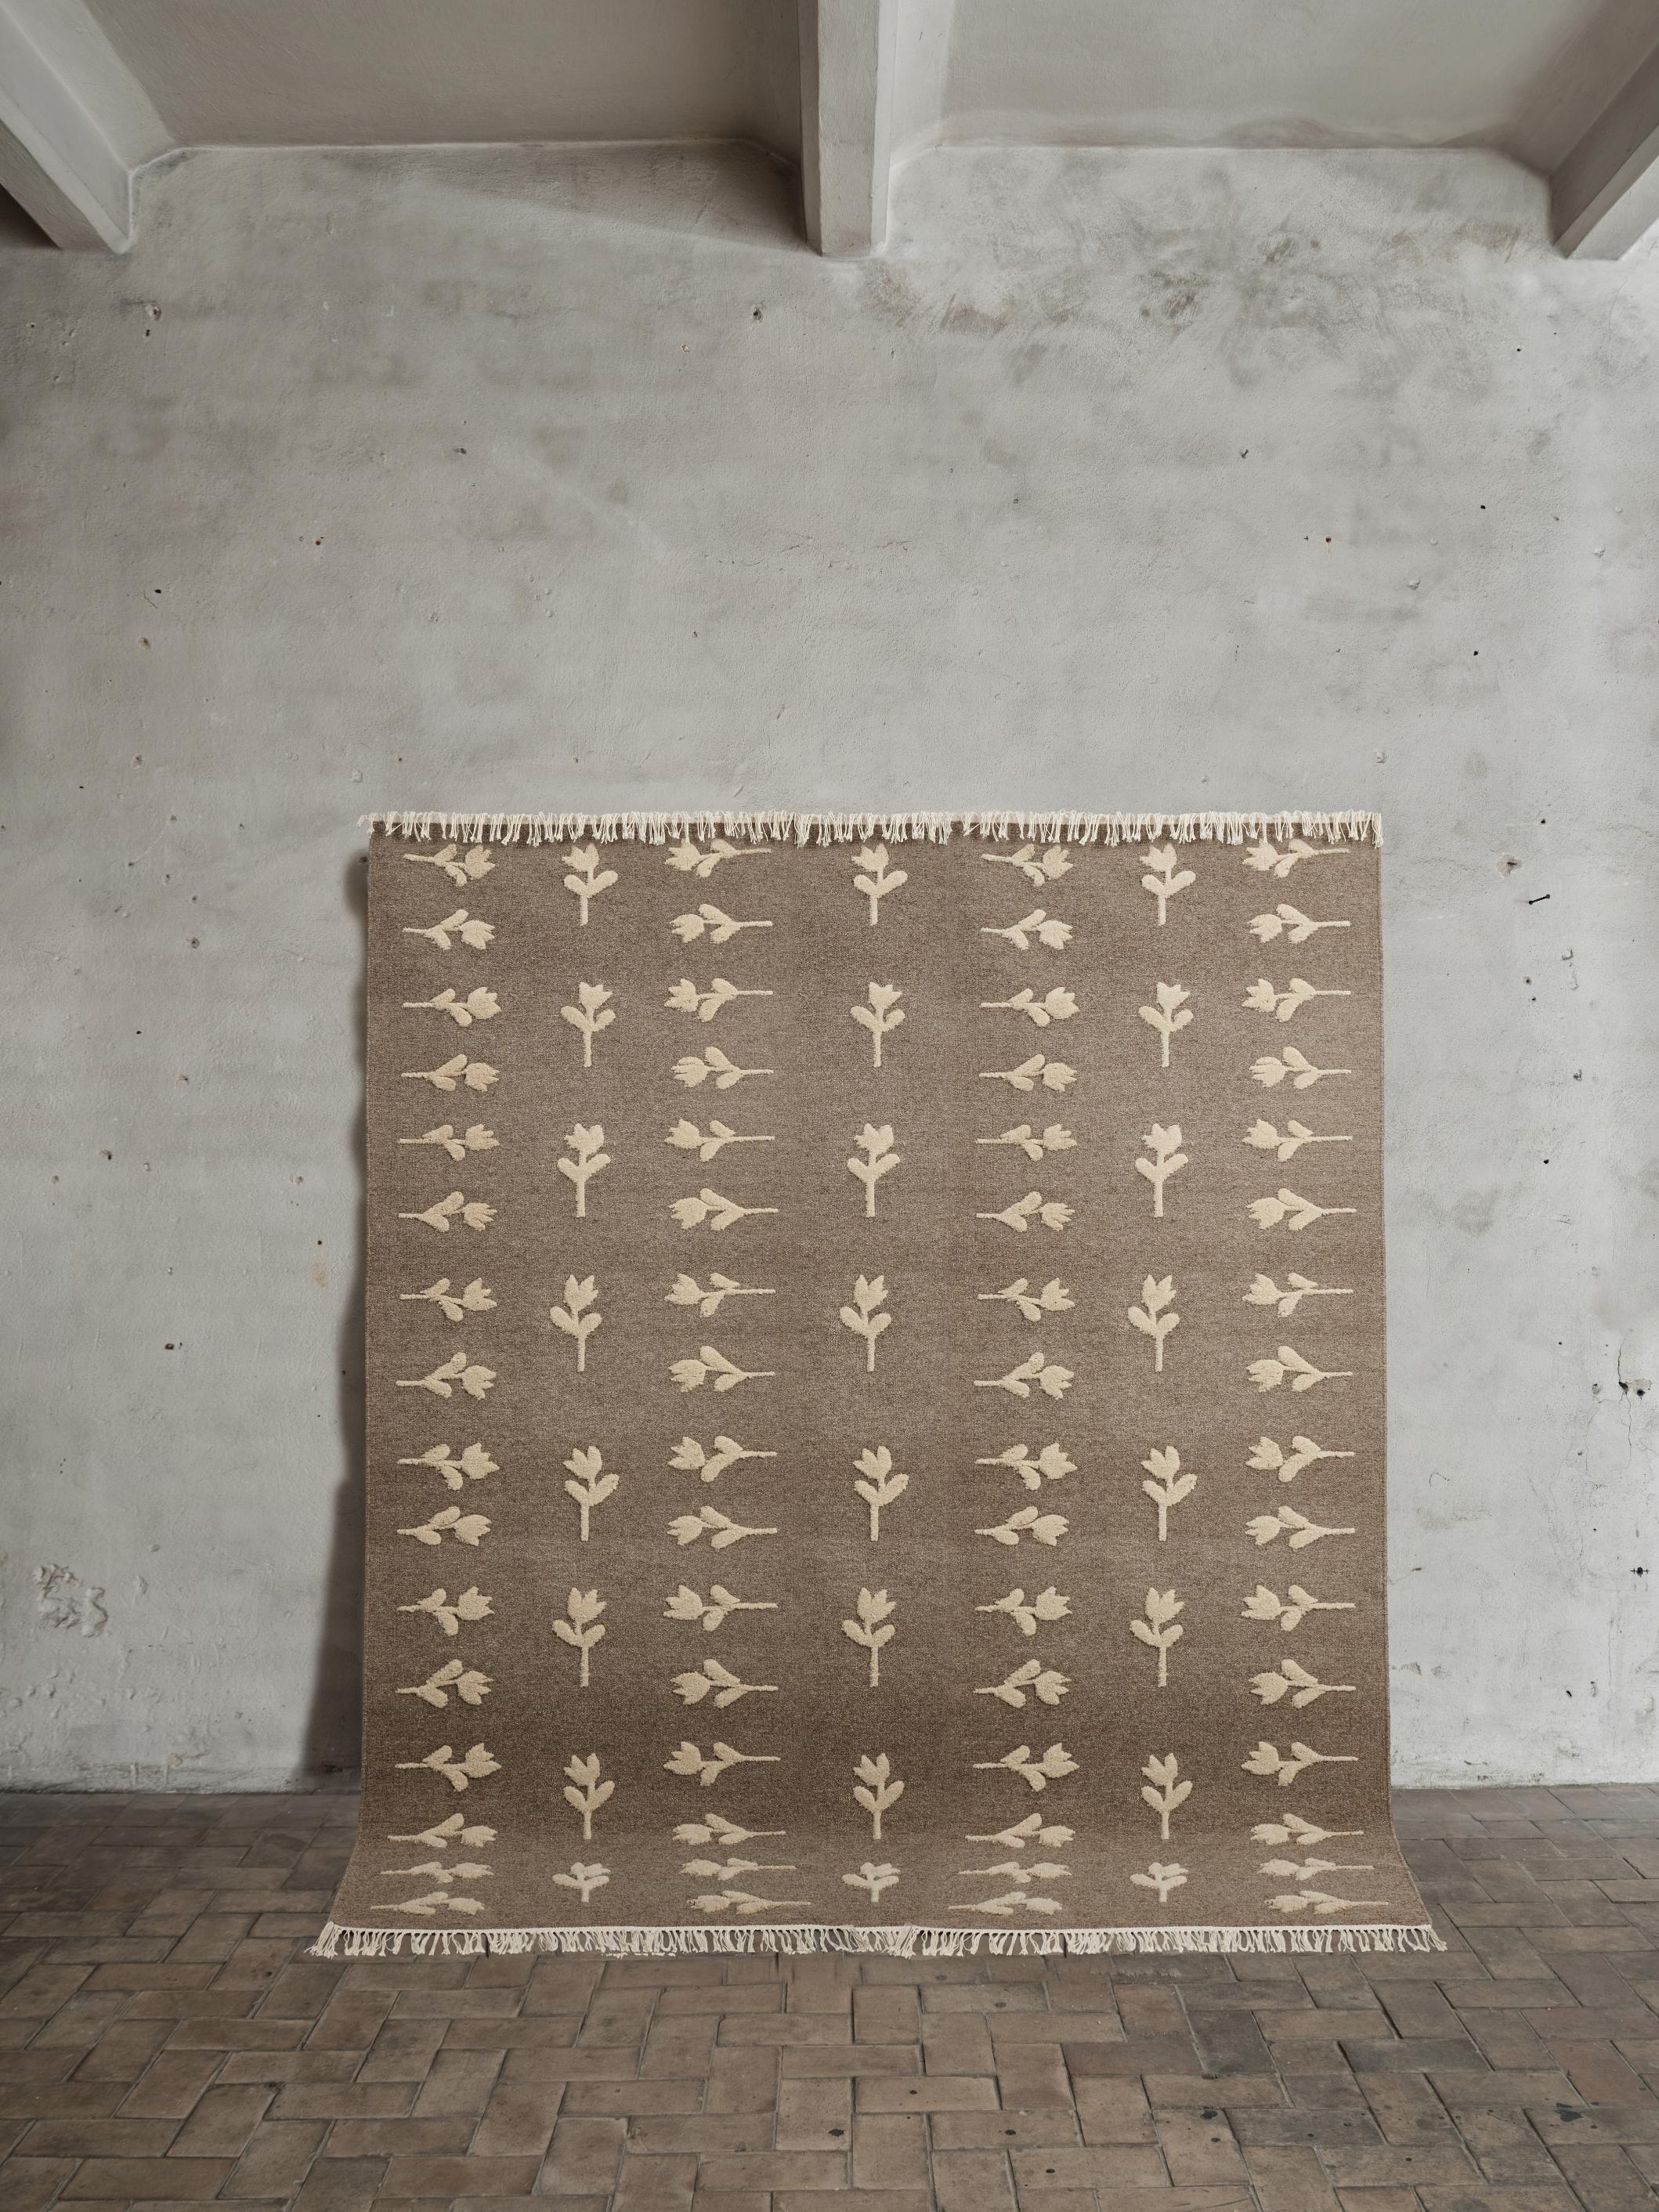 No.18 Rug by Cappelen Dimyr
Dimensions: D 230 x H 280 cm (excl. fringes)
Materials: 85% wool, 15% cotton

Colonnade no.09 & Rug no.18 is a grey-brown flat-woven rug with light beige hand-knotted floral pattern which gives a slightly high-and low